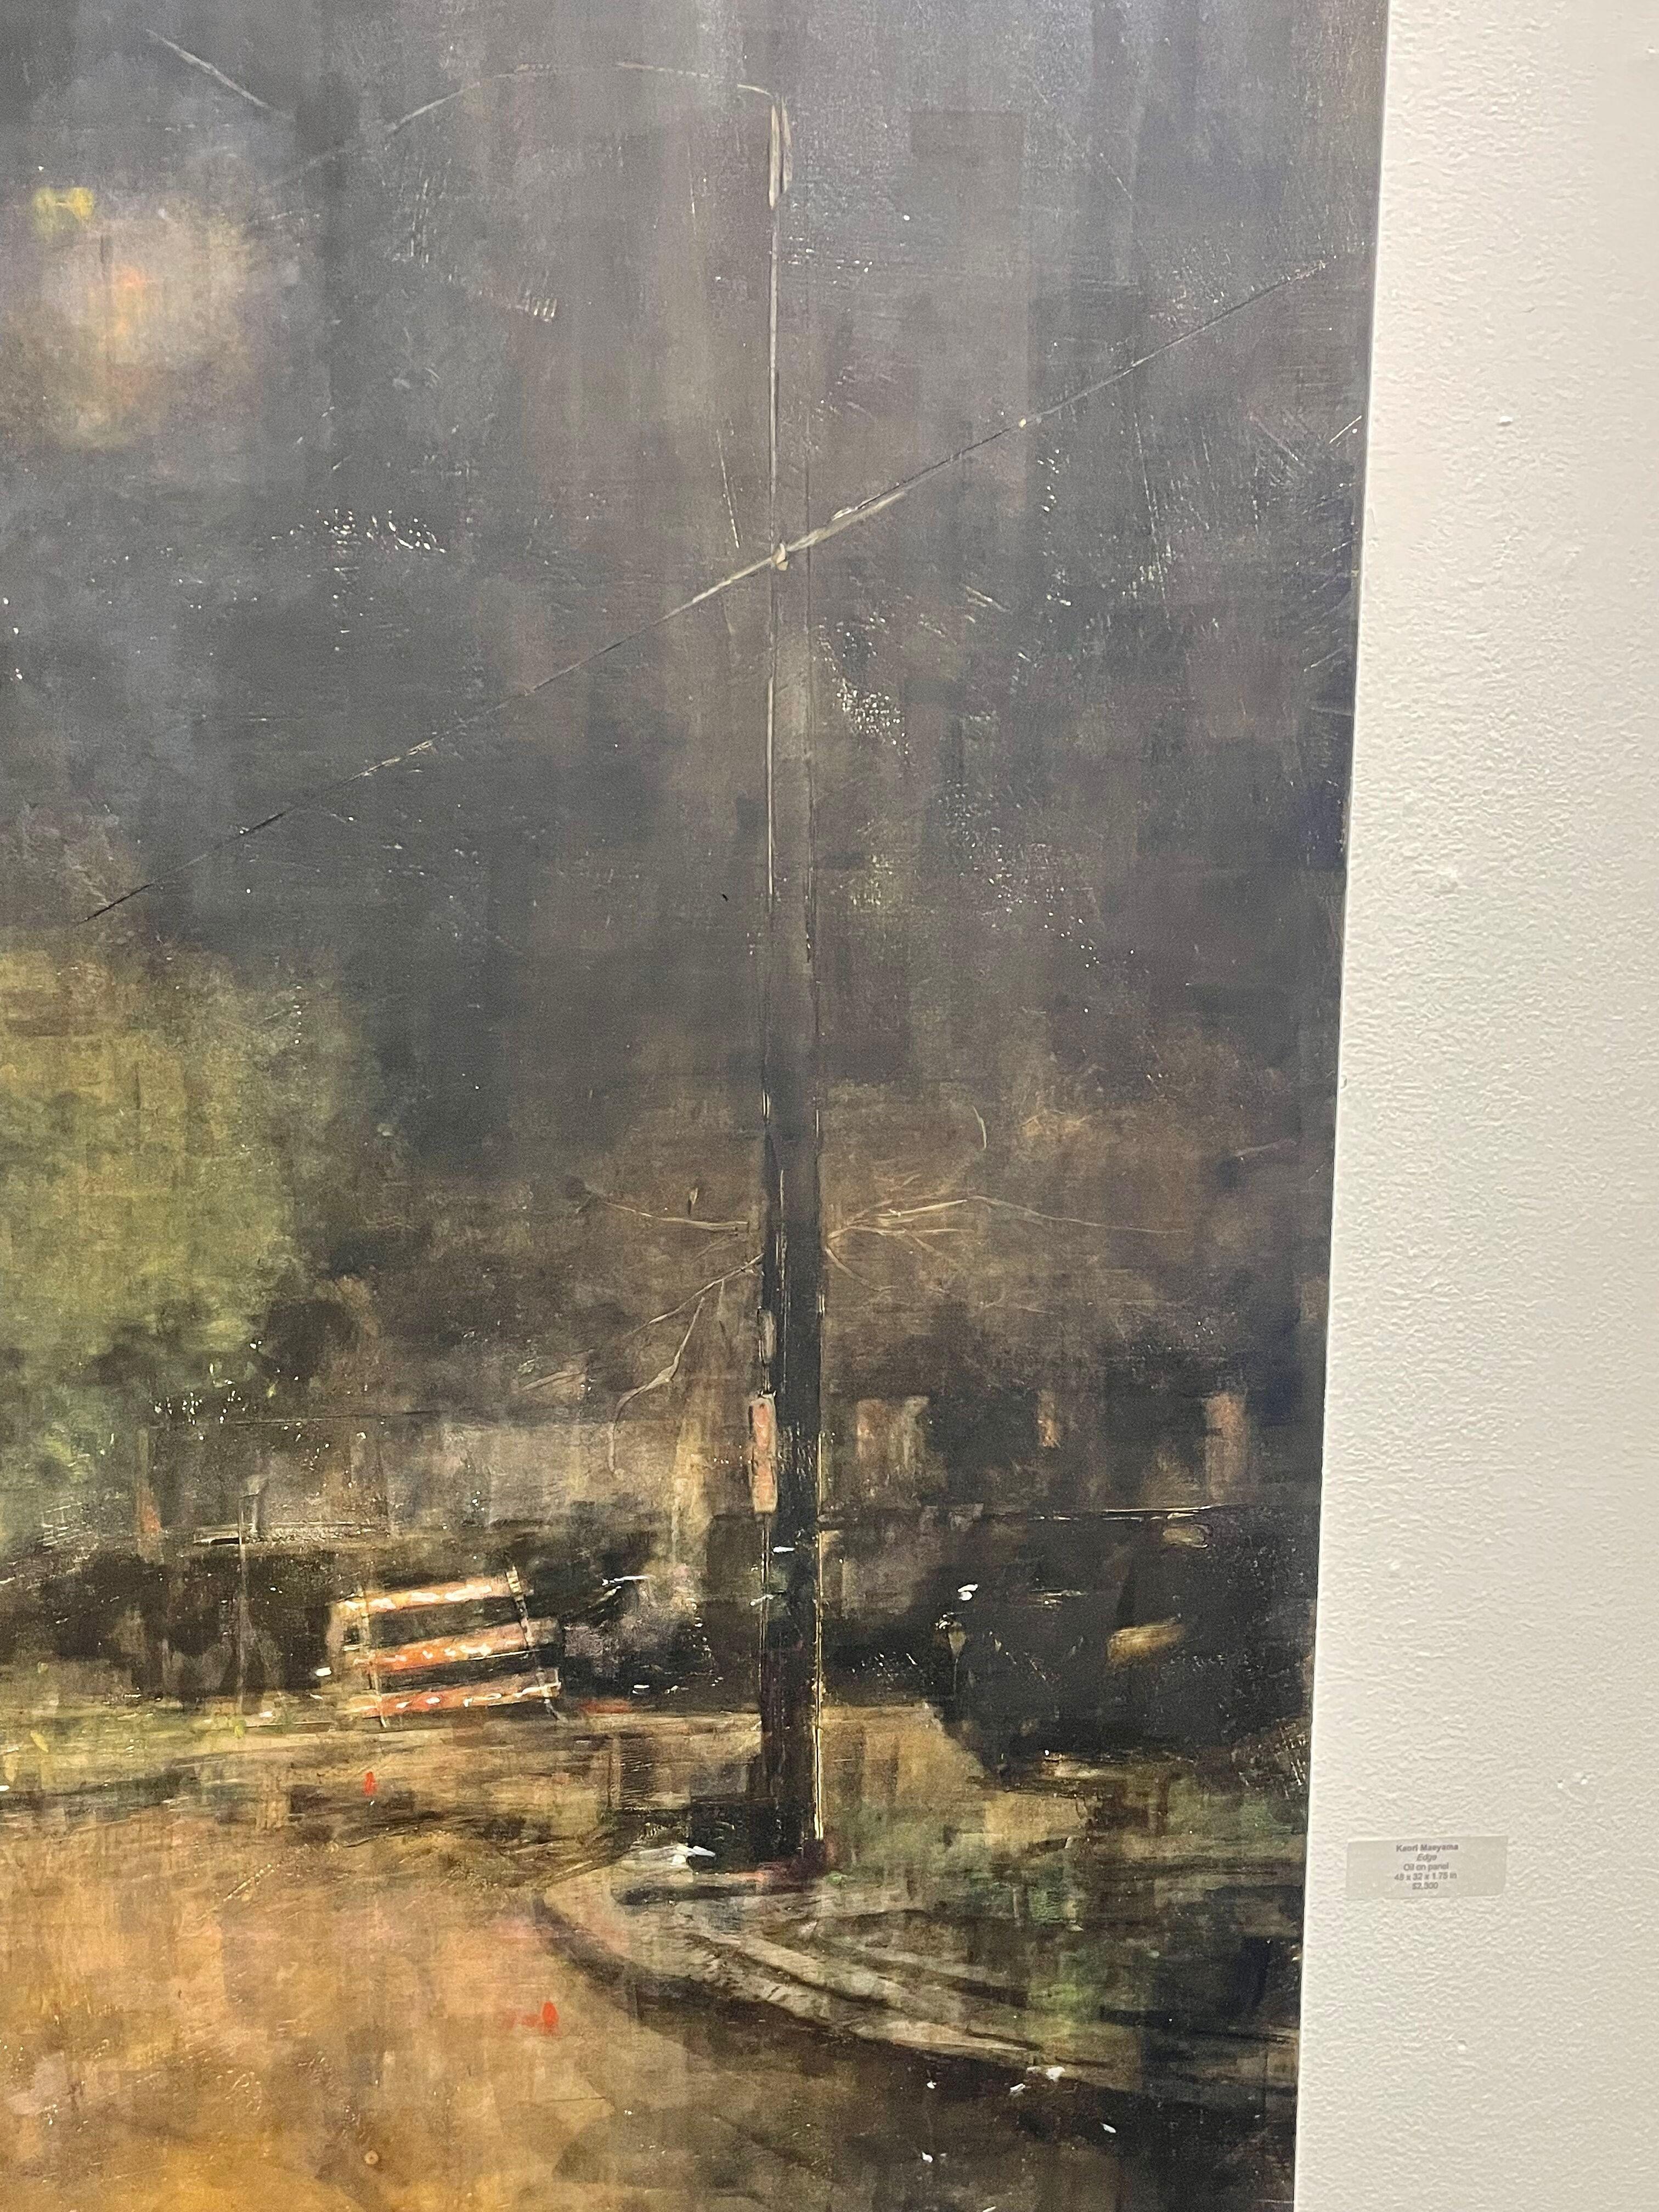 This is the nearest street corner to my house. I didn’t know what to call this painting, and I thought Edge might make sense since this is the last intersection before the levee. Sometimes it feels like we are at the edge of civilization in many